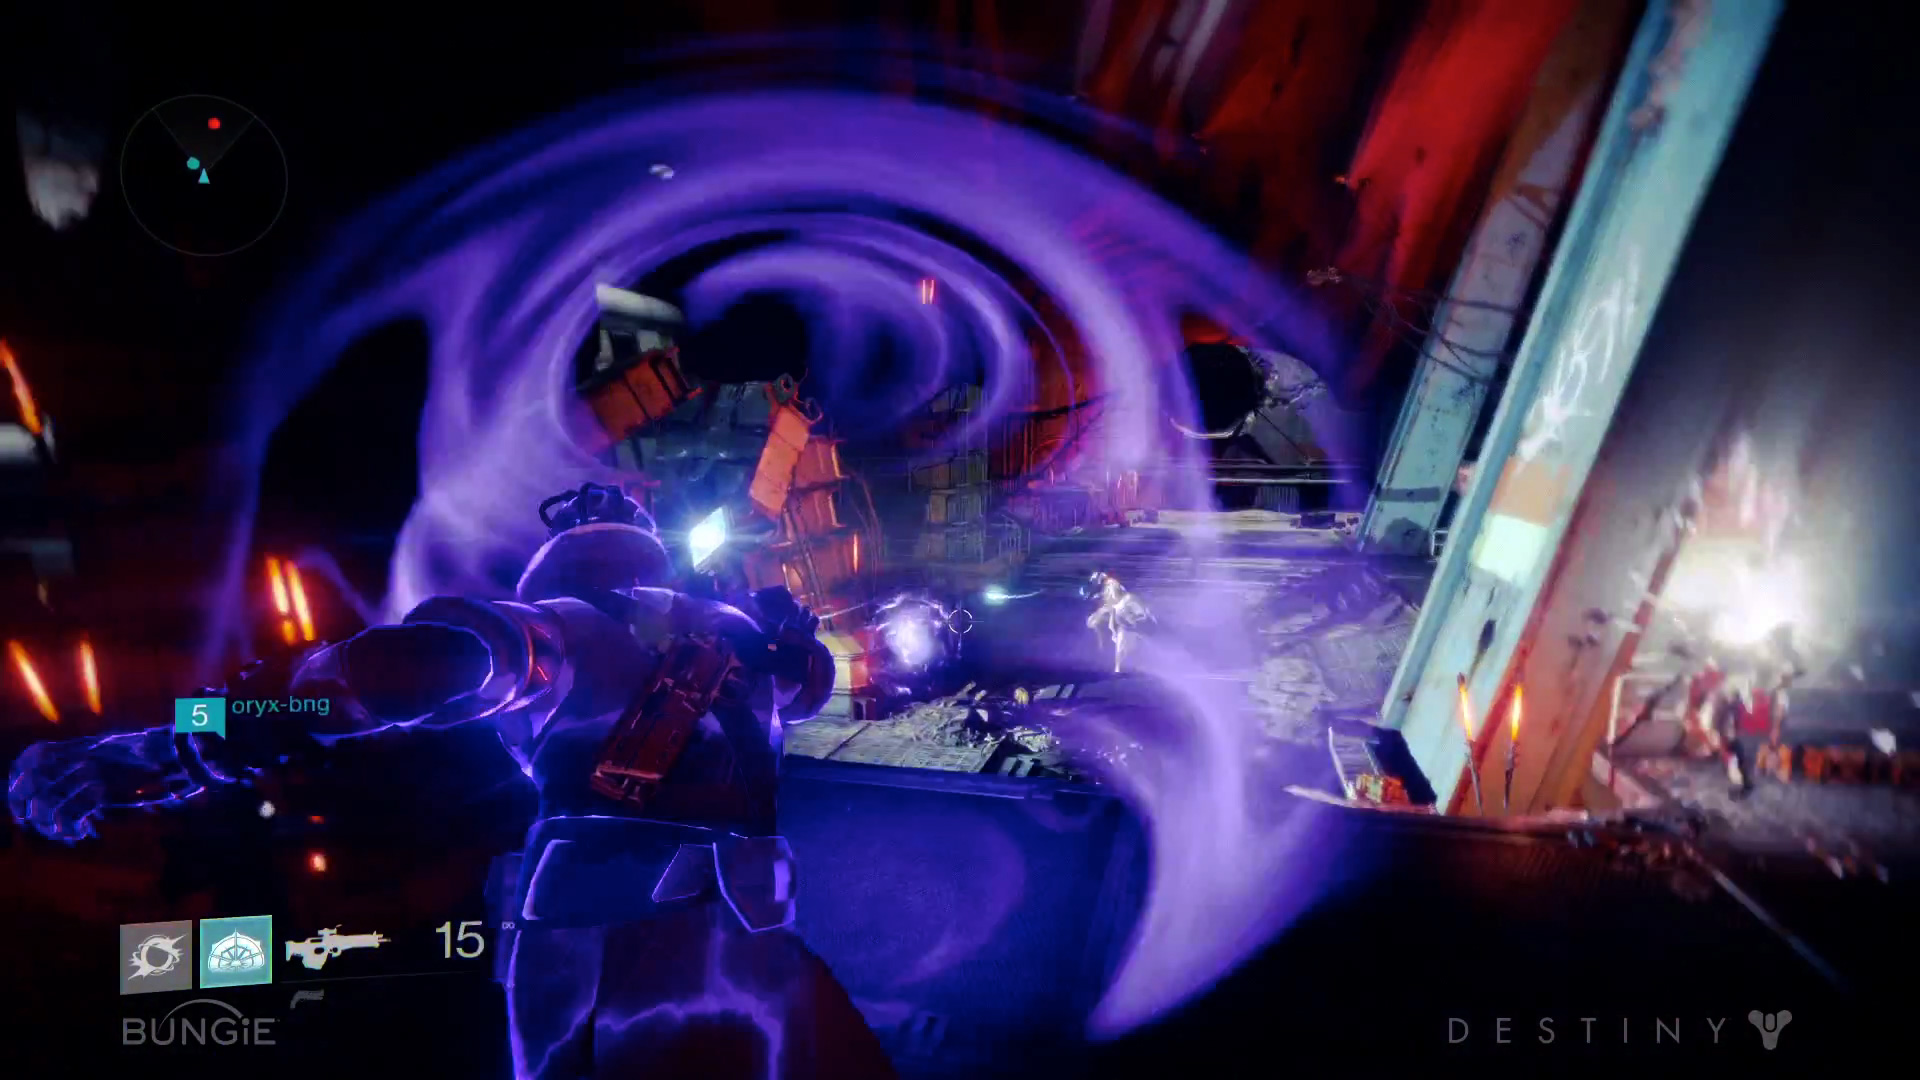 bungies-destiny-12-minutes-of-epic-gameplay-action-25.jpg